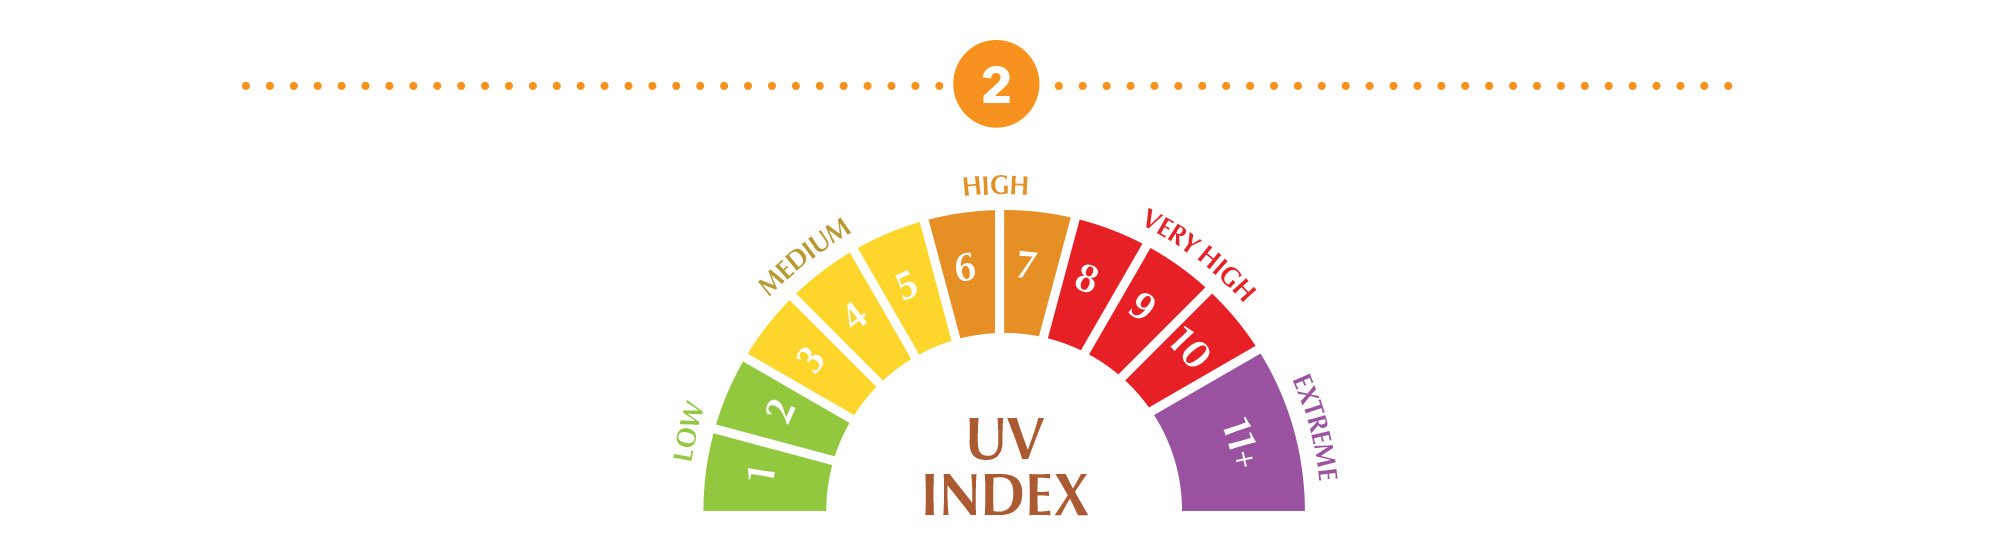 A rendering of a UV Index scale showing various colours.